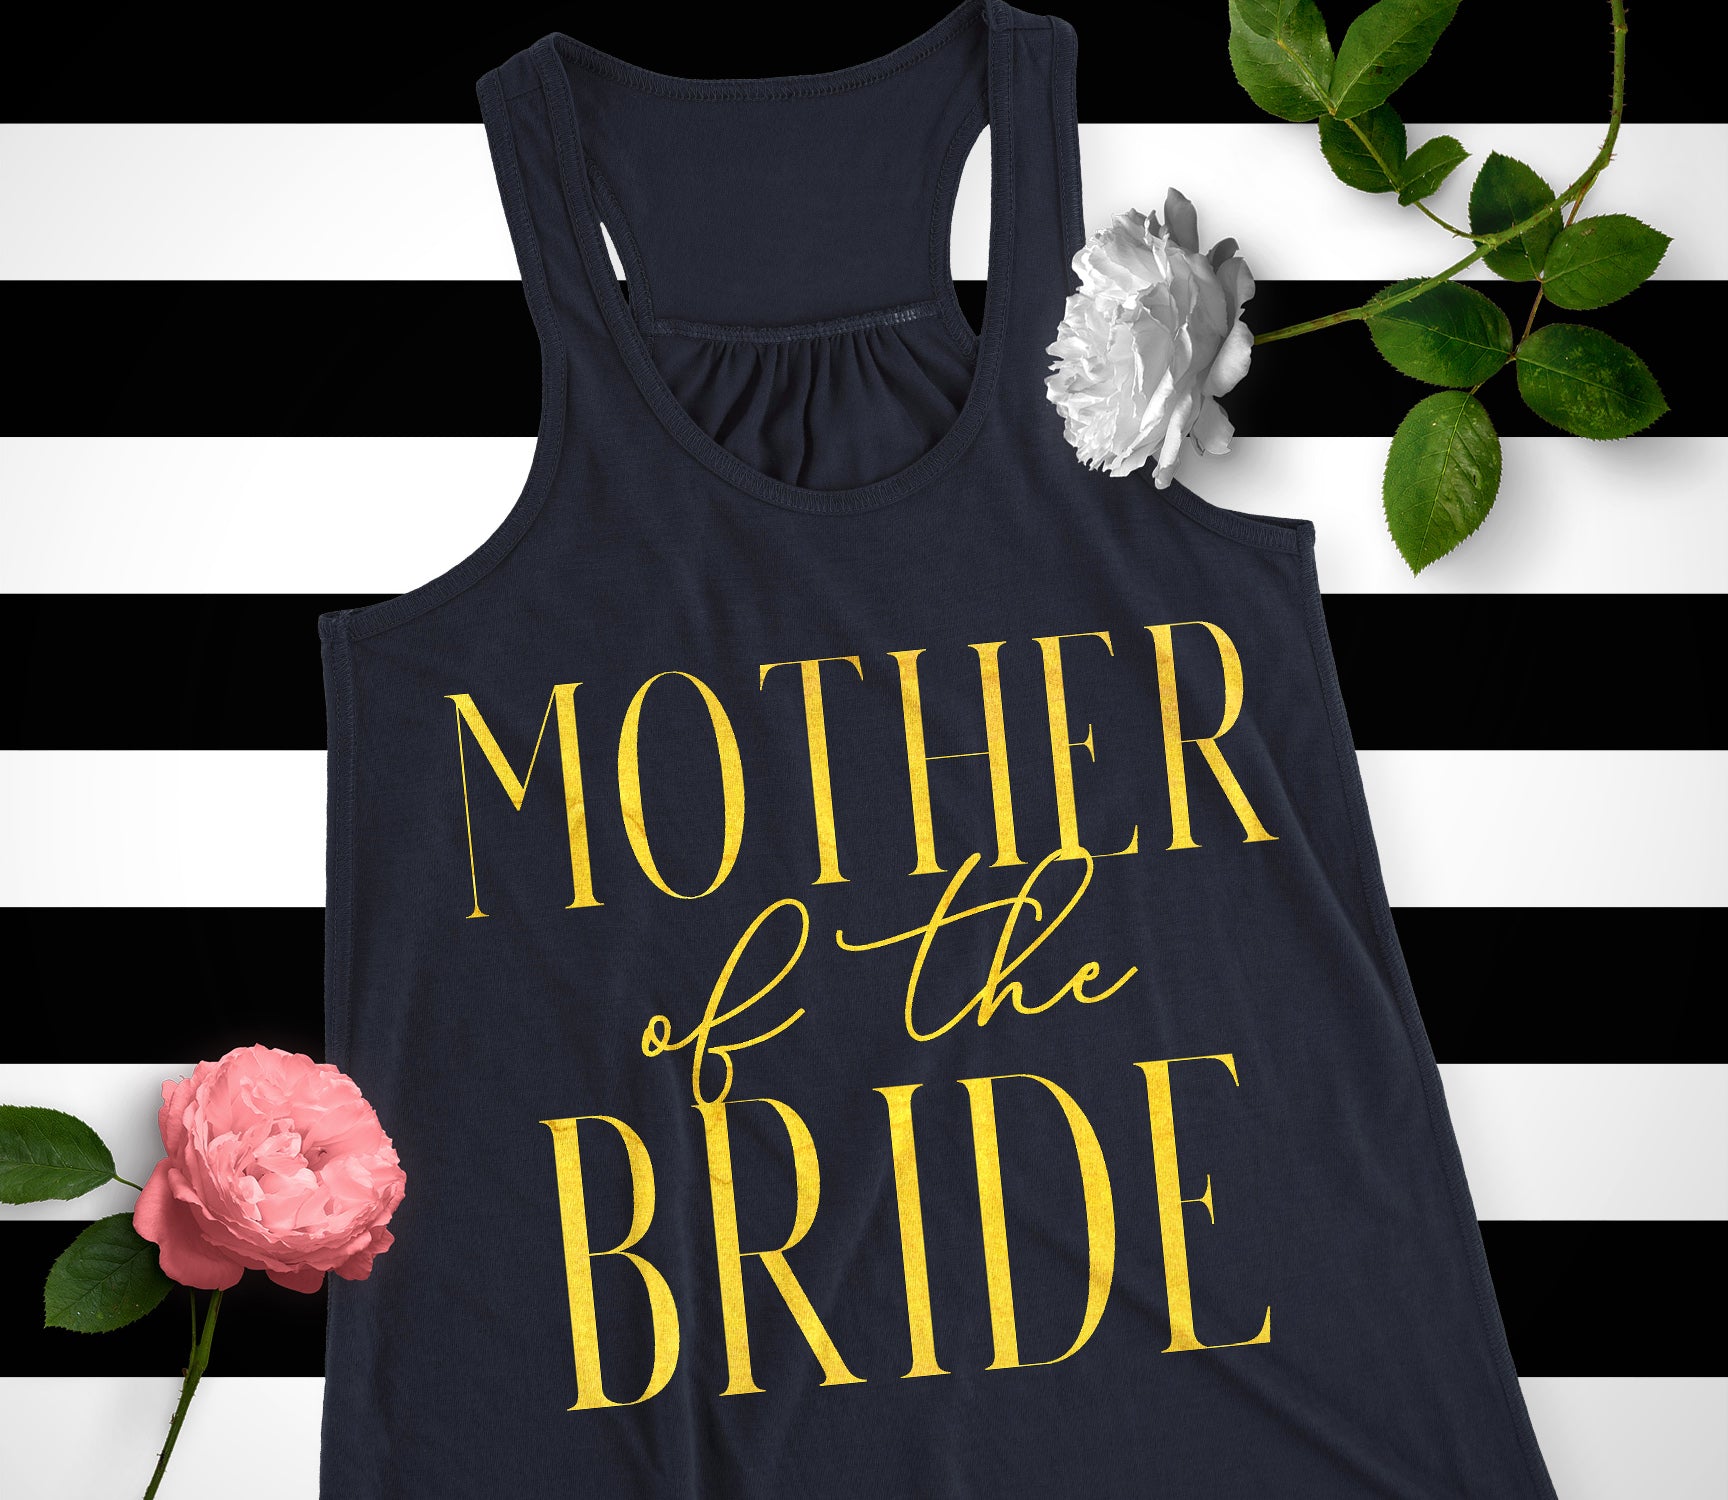 Mother of the Bride Shirt with Gold Glitter Print